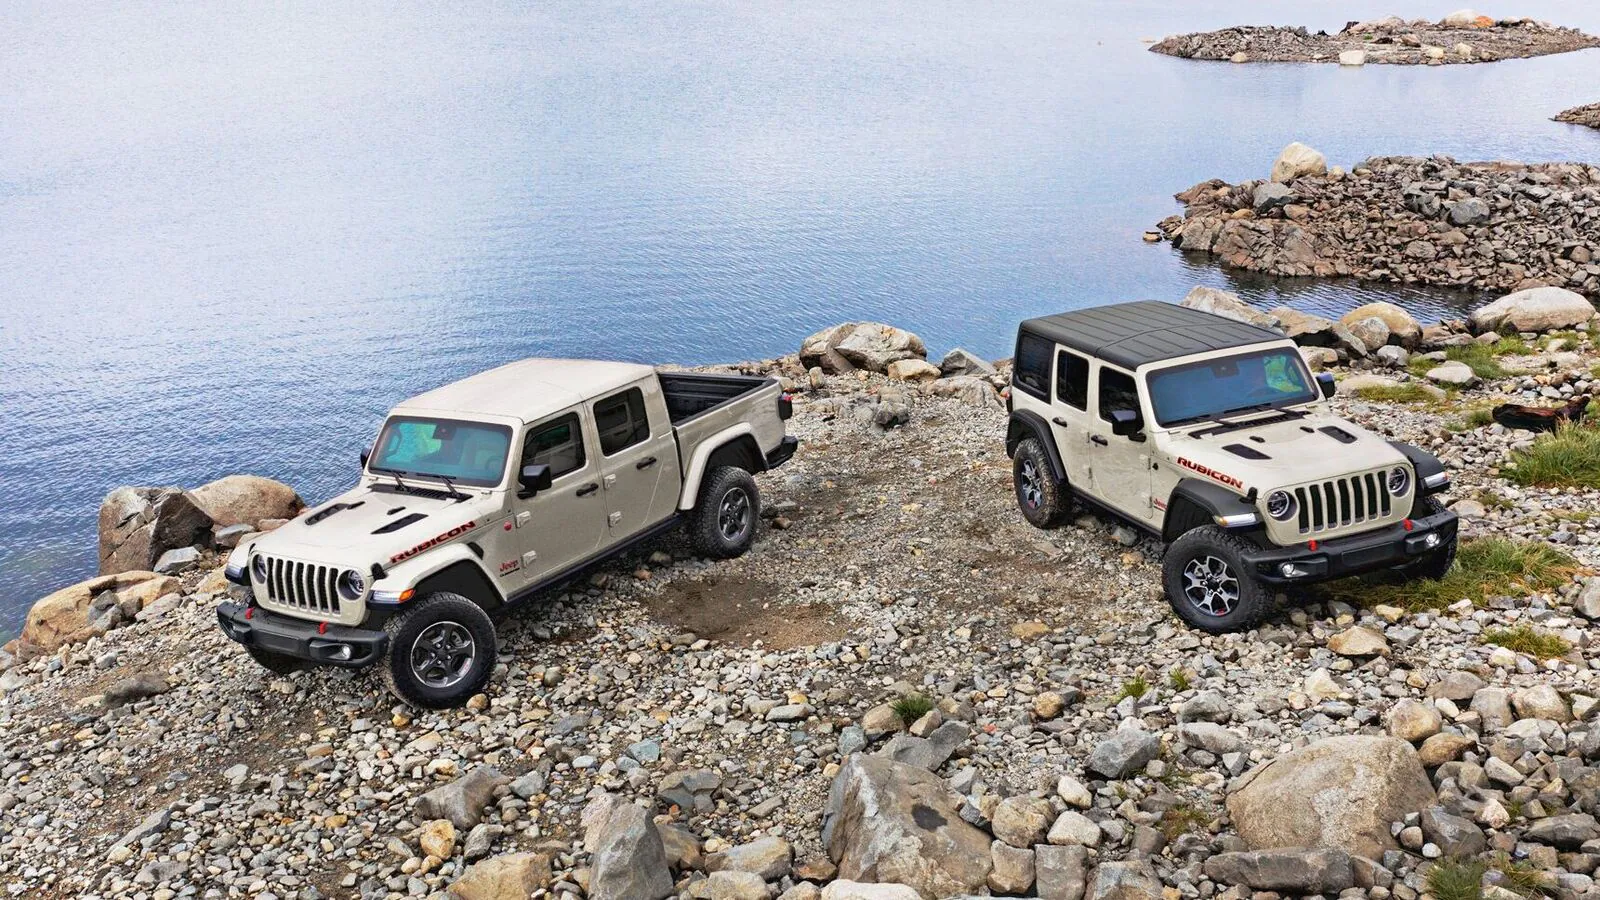 The New Colors Of Jeep Wrangler!